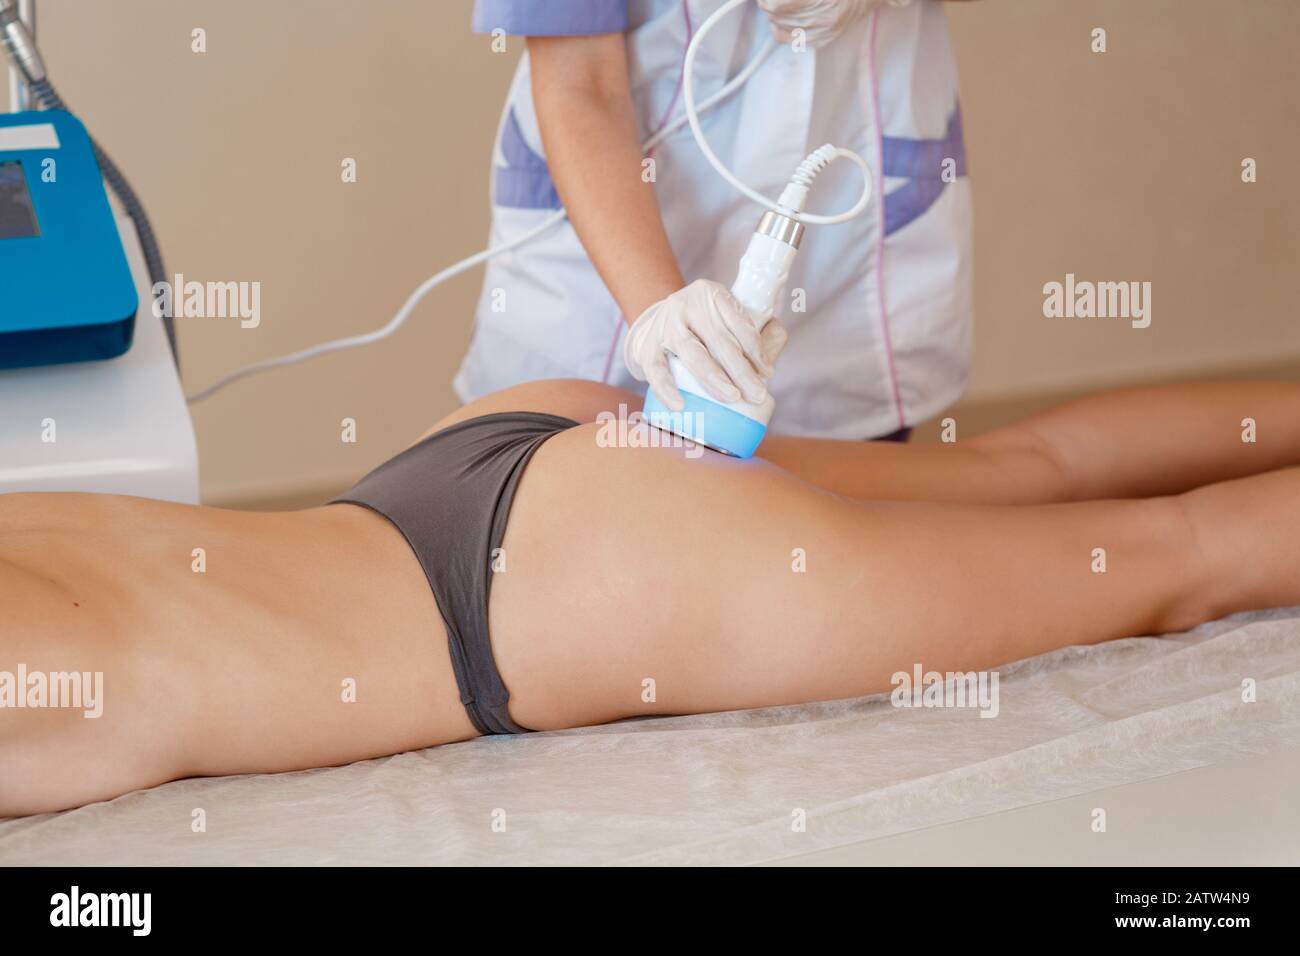 Hardware cosmetology. Body care. Spa treatment. Ultrasound cavitation body contouring treatment. Woman getting anti-cellulite and anti-fat therapy in beauty salon Stock Photo